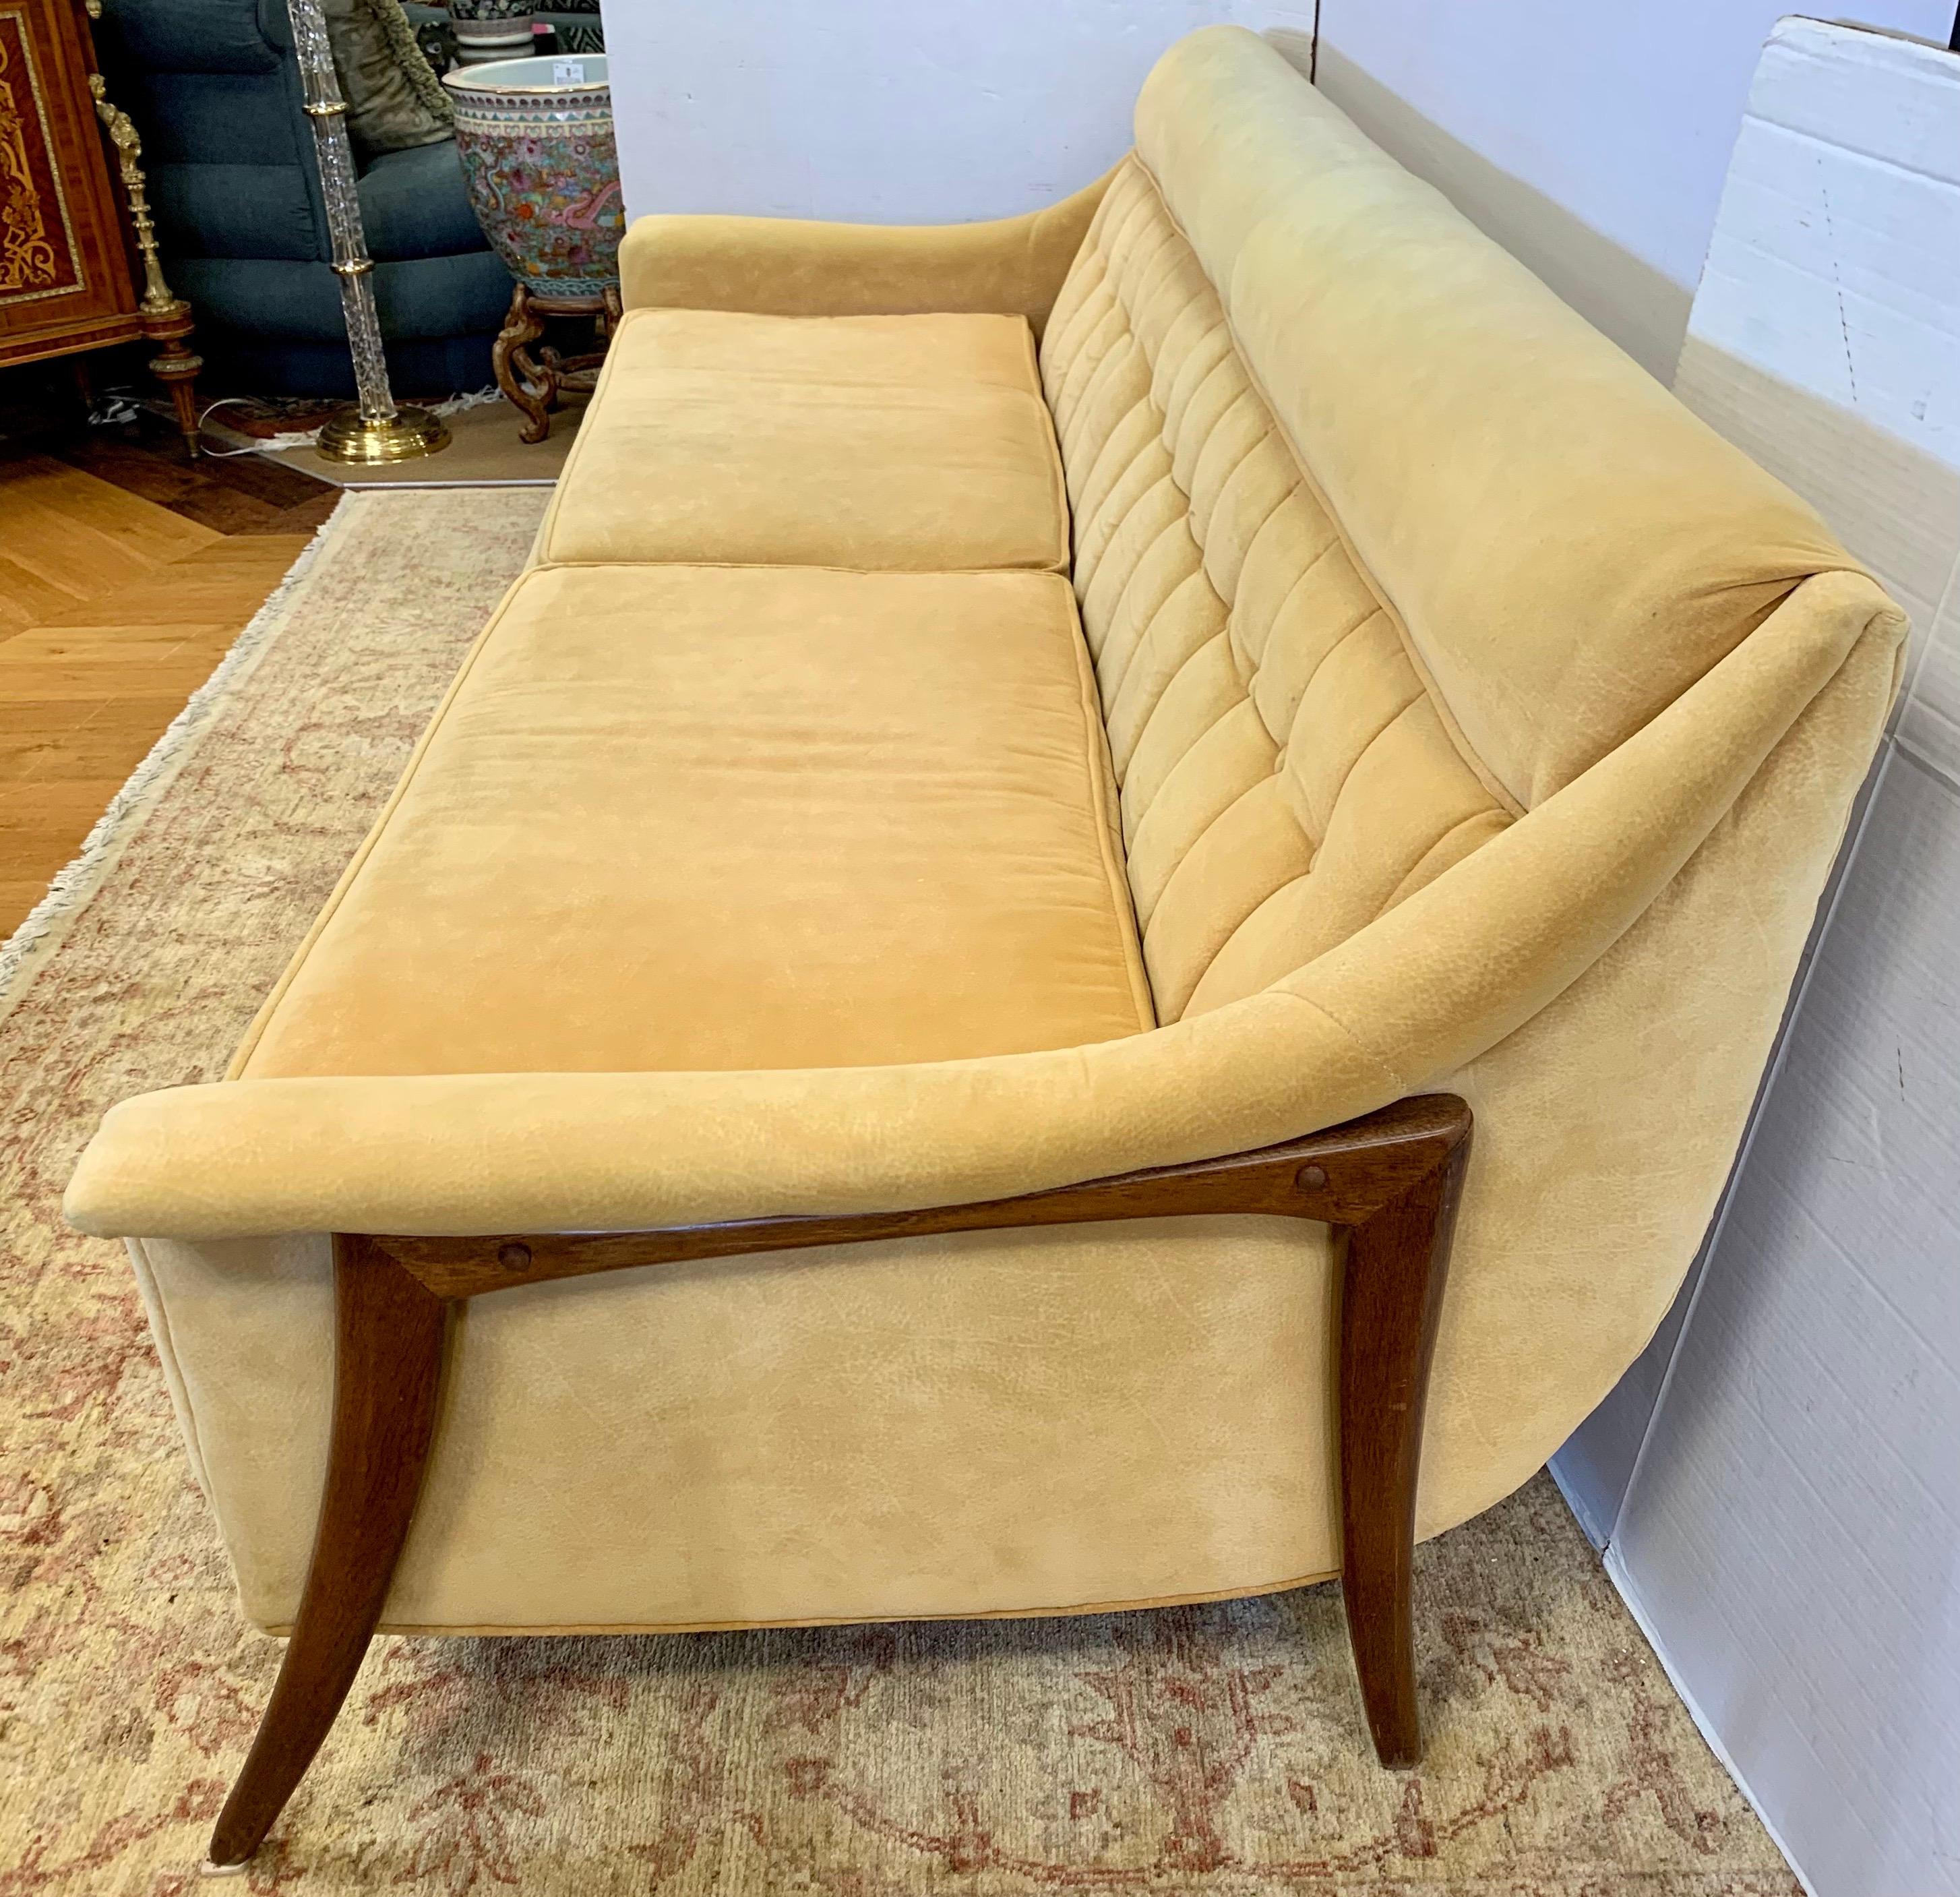 Stunning Danish modern sculptural sofa with walnut boomerang like supports and original straw colored ultra suede fabric. Elegant button tufted backrests. Great scale at 86